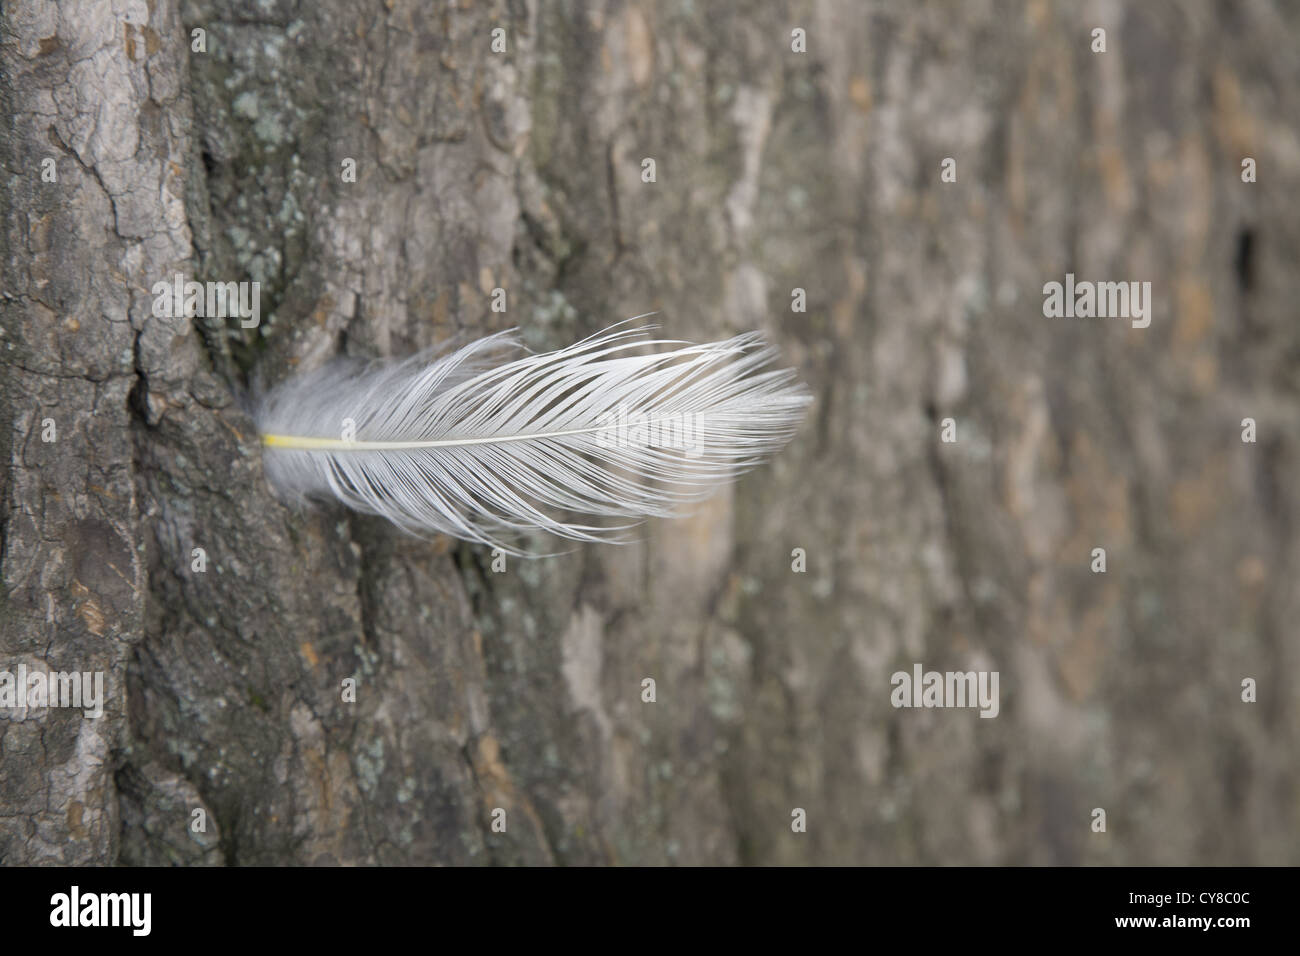 Bird feather lodged in a tree trunk, Prospect Park, Brooklyn, NY. Stock Photo